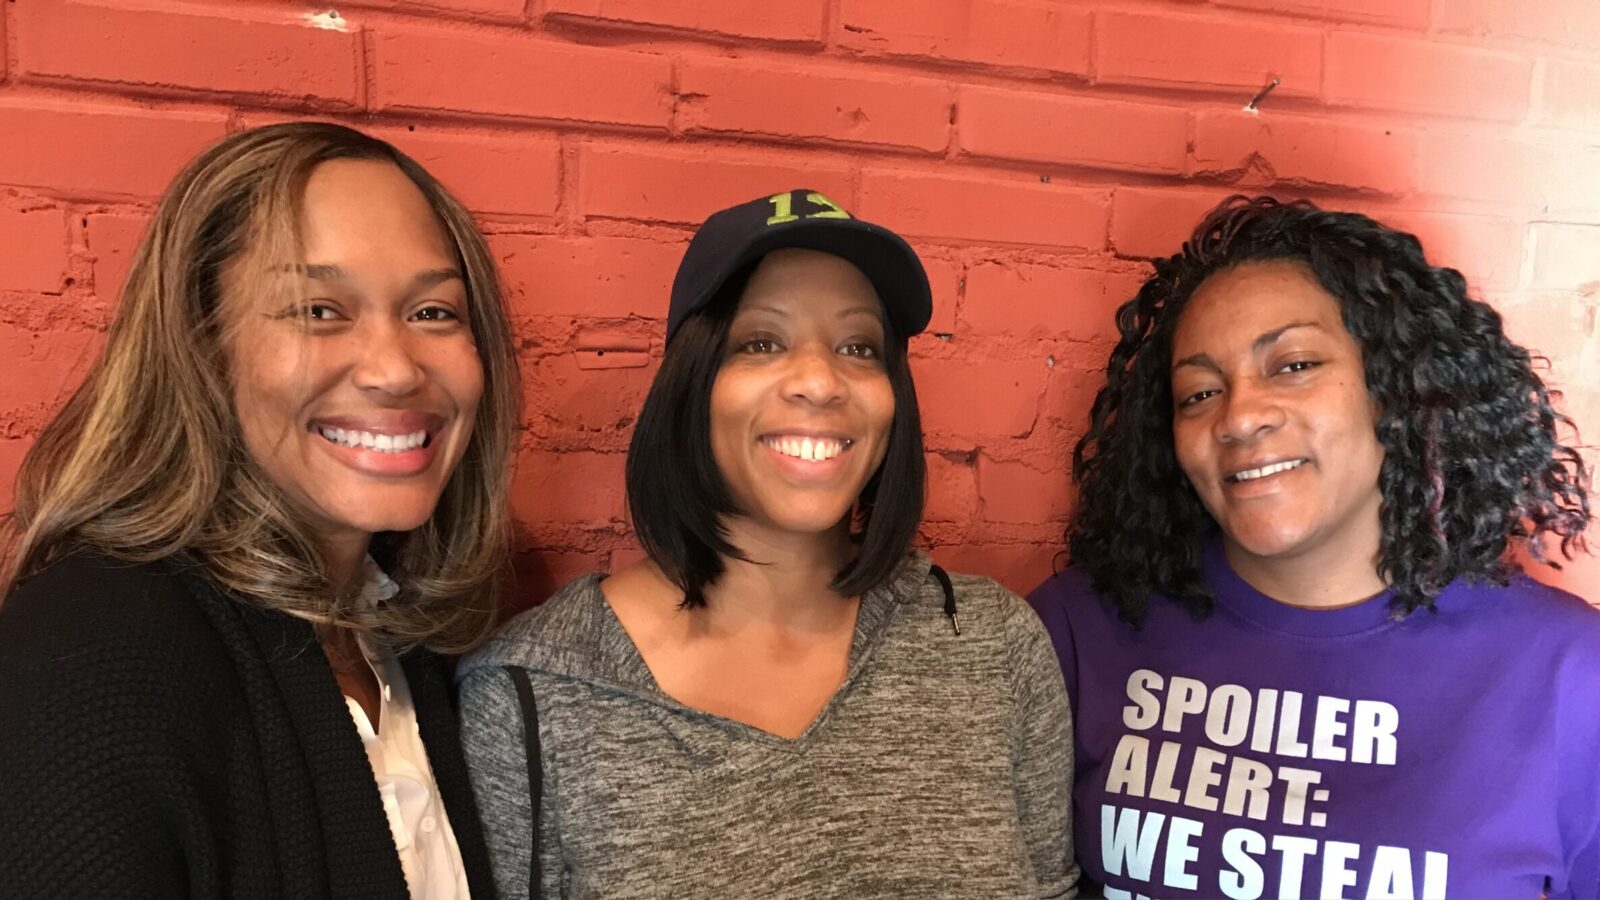 Former CEO Andrea Caupain Sanderson stands with Angelique Kitchen and Robin Byrd after talking about changing the organization's name to honor Ms. Roberta Byrd Barr, their grandmother.